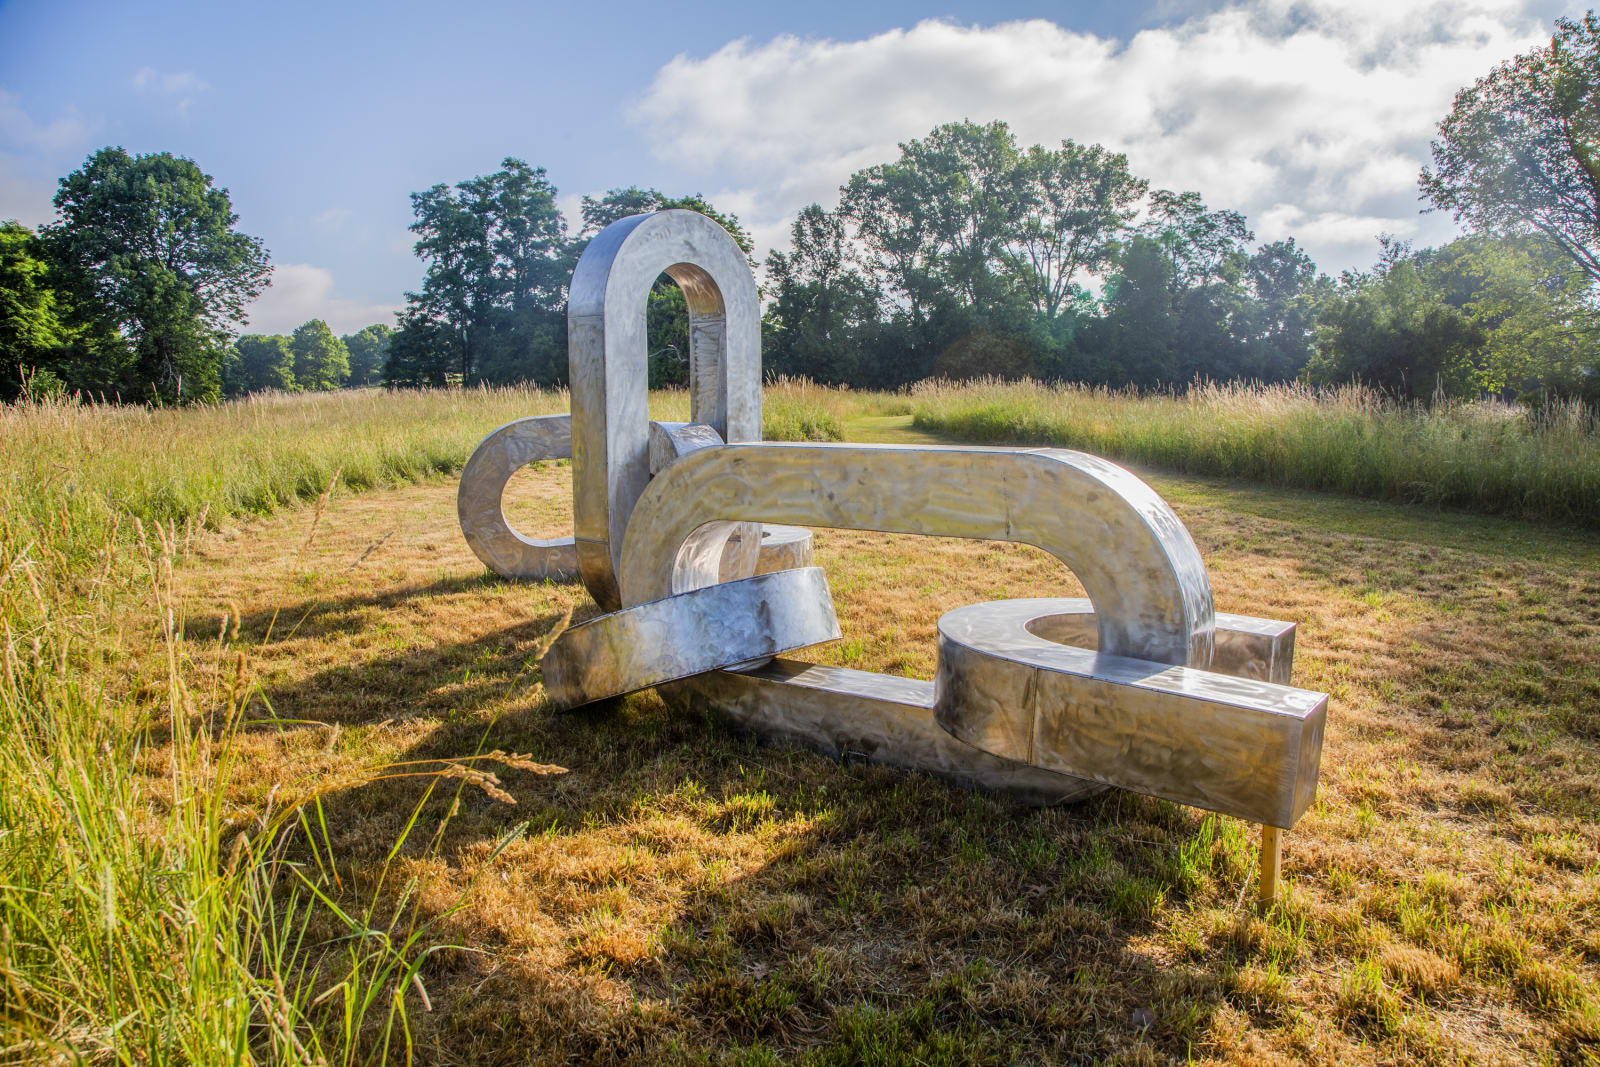 <div class="additional_caption">'Song of the Broken Chains', 2020. Stainless steel. Approx. 243.84 x 548.64 x 365.76cm (96 x 216 x 144in)</div>